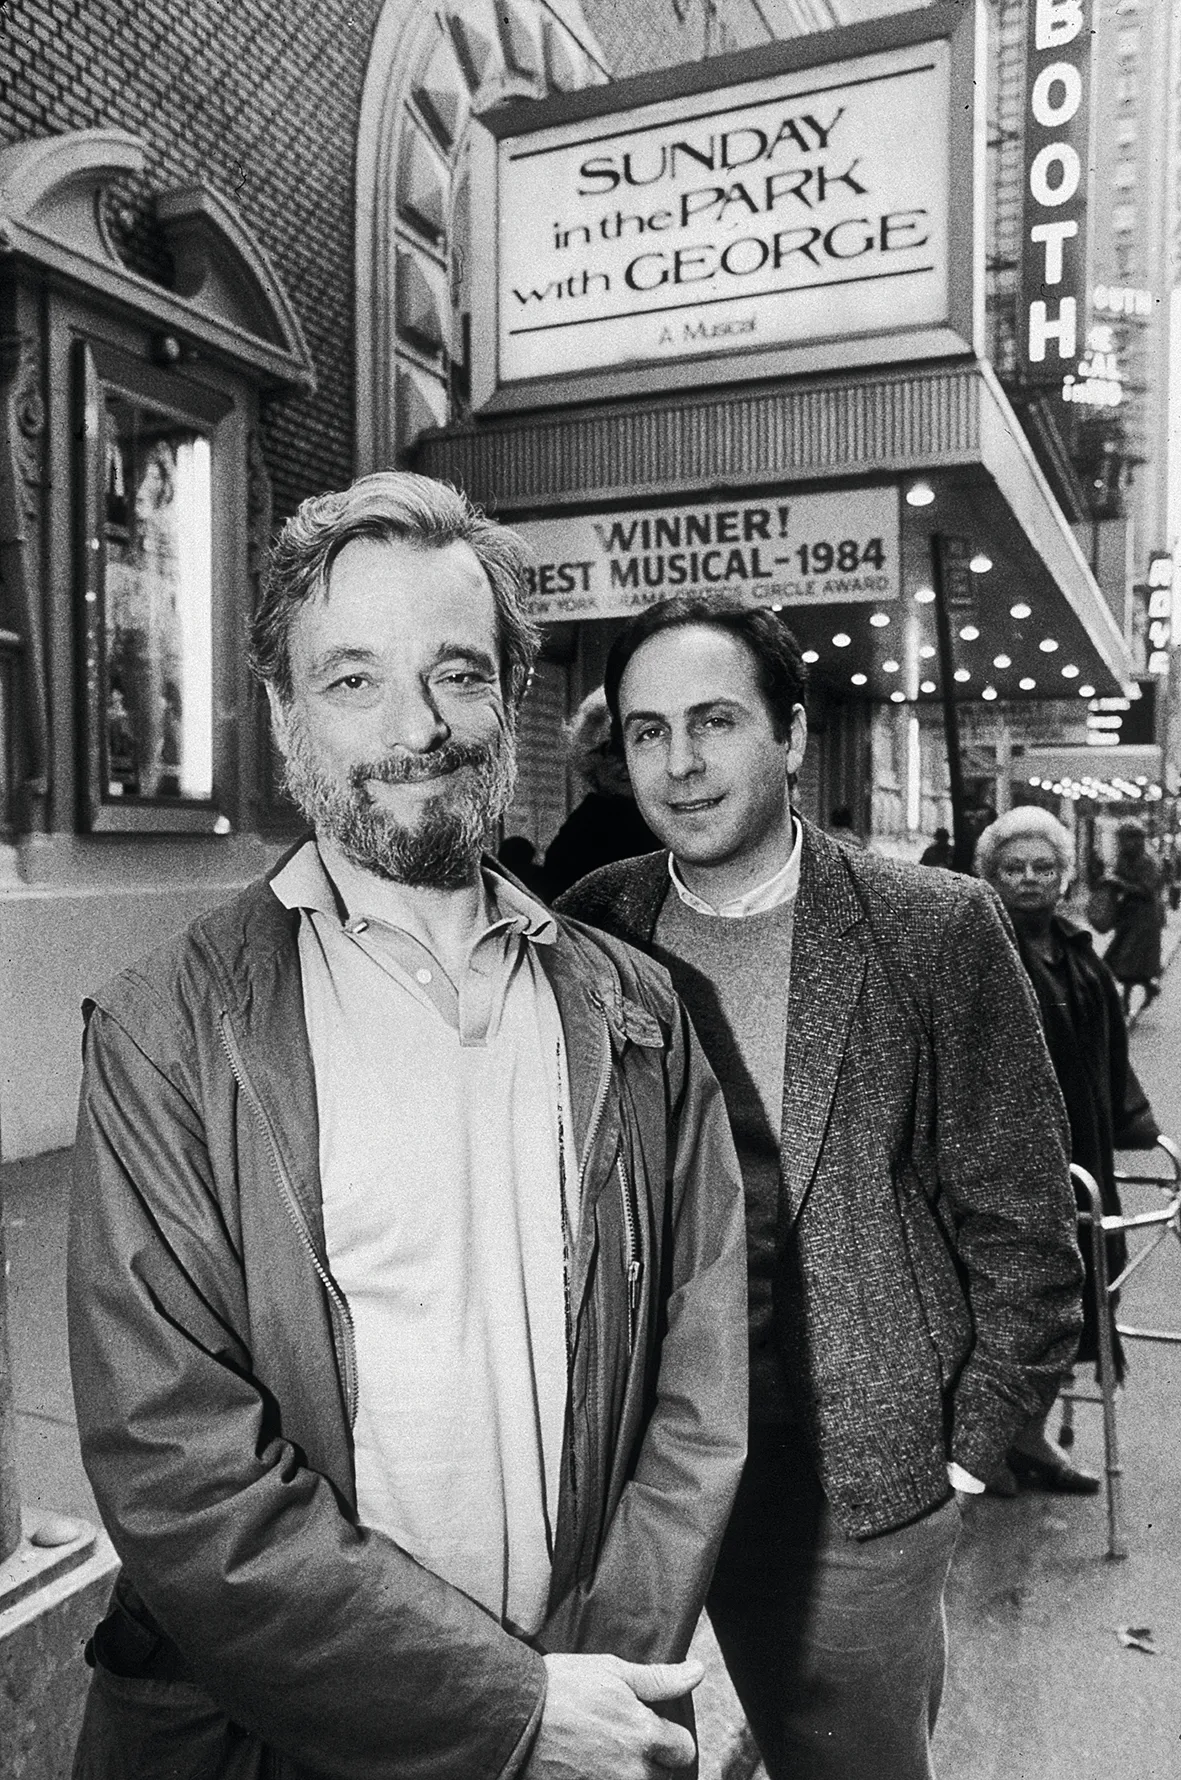 24th April 1985: L-R: American composer Stephen Sondheim and playwright James Lapine pose in front of the marquee of the Booth Theatre on 45th Street, New York City. They won the Pulitzer Prize and the Tony Award for their musical, 'Sunday In The Park With George,' playing at the theatre. (Photo by Sara Krulwich/New York Times Co./Getty Images)